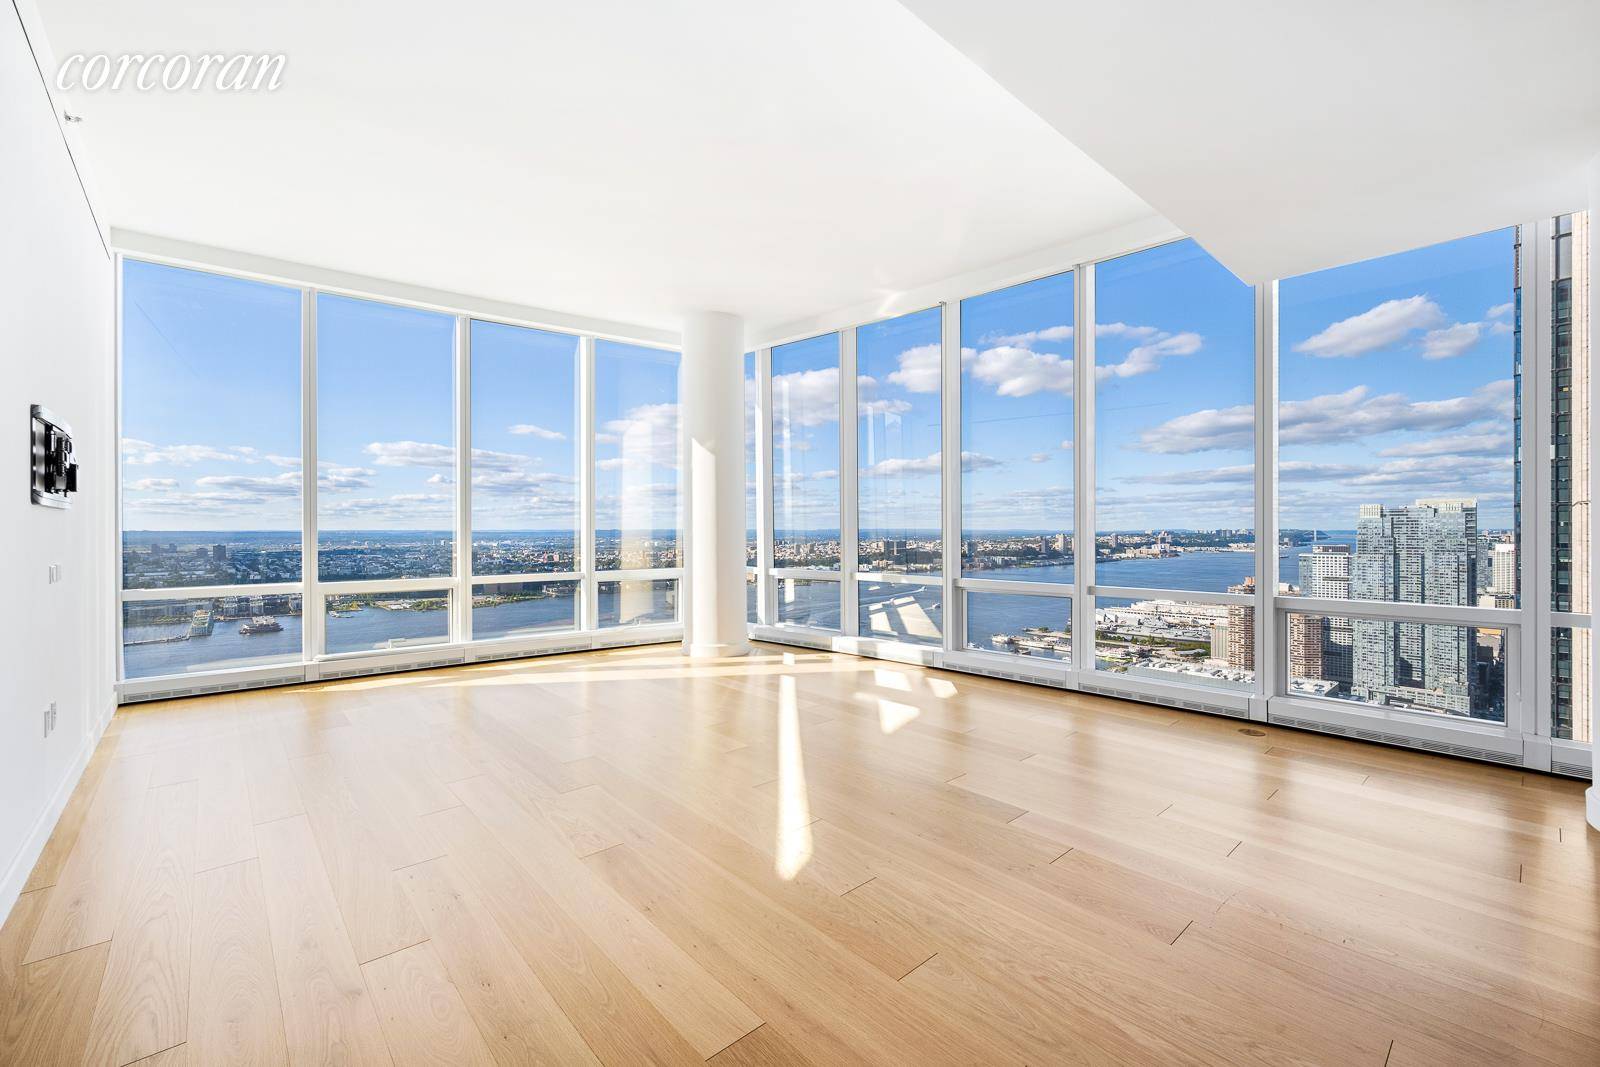 Loft Residence 68D is a spectacular 2 bedroom residence of 2, 002 square feet with ceilings up to 10A 10 and sunset views of the Hudson River.